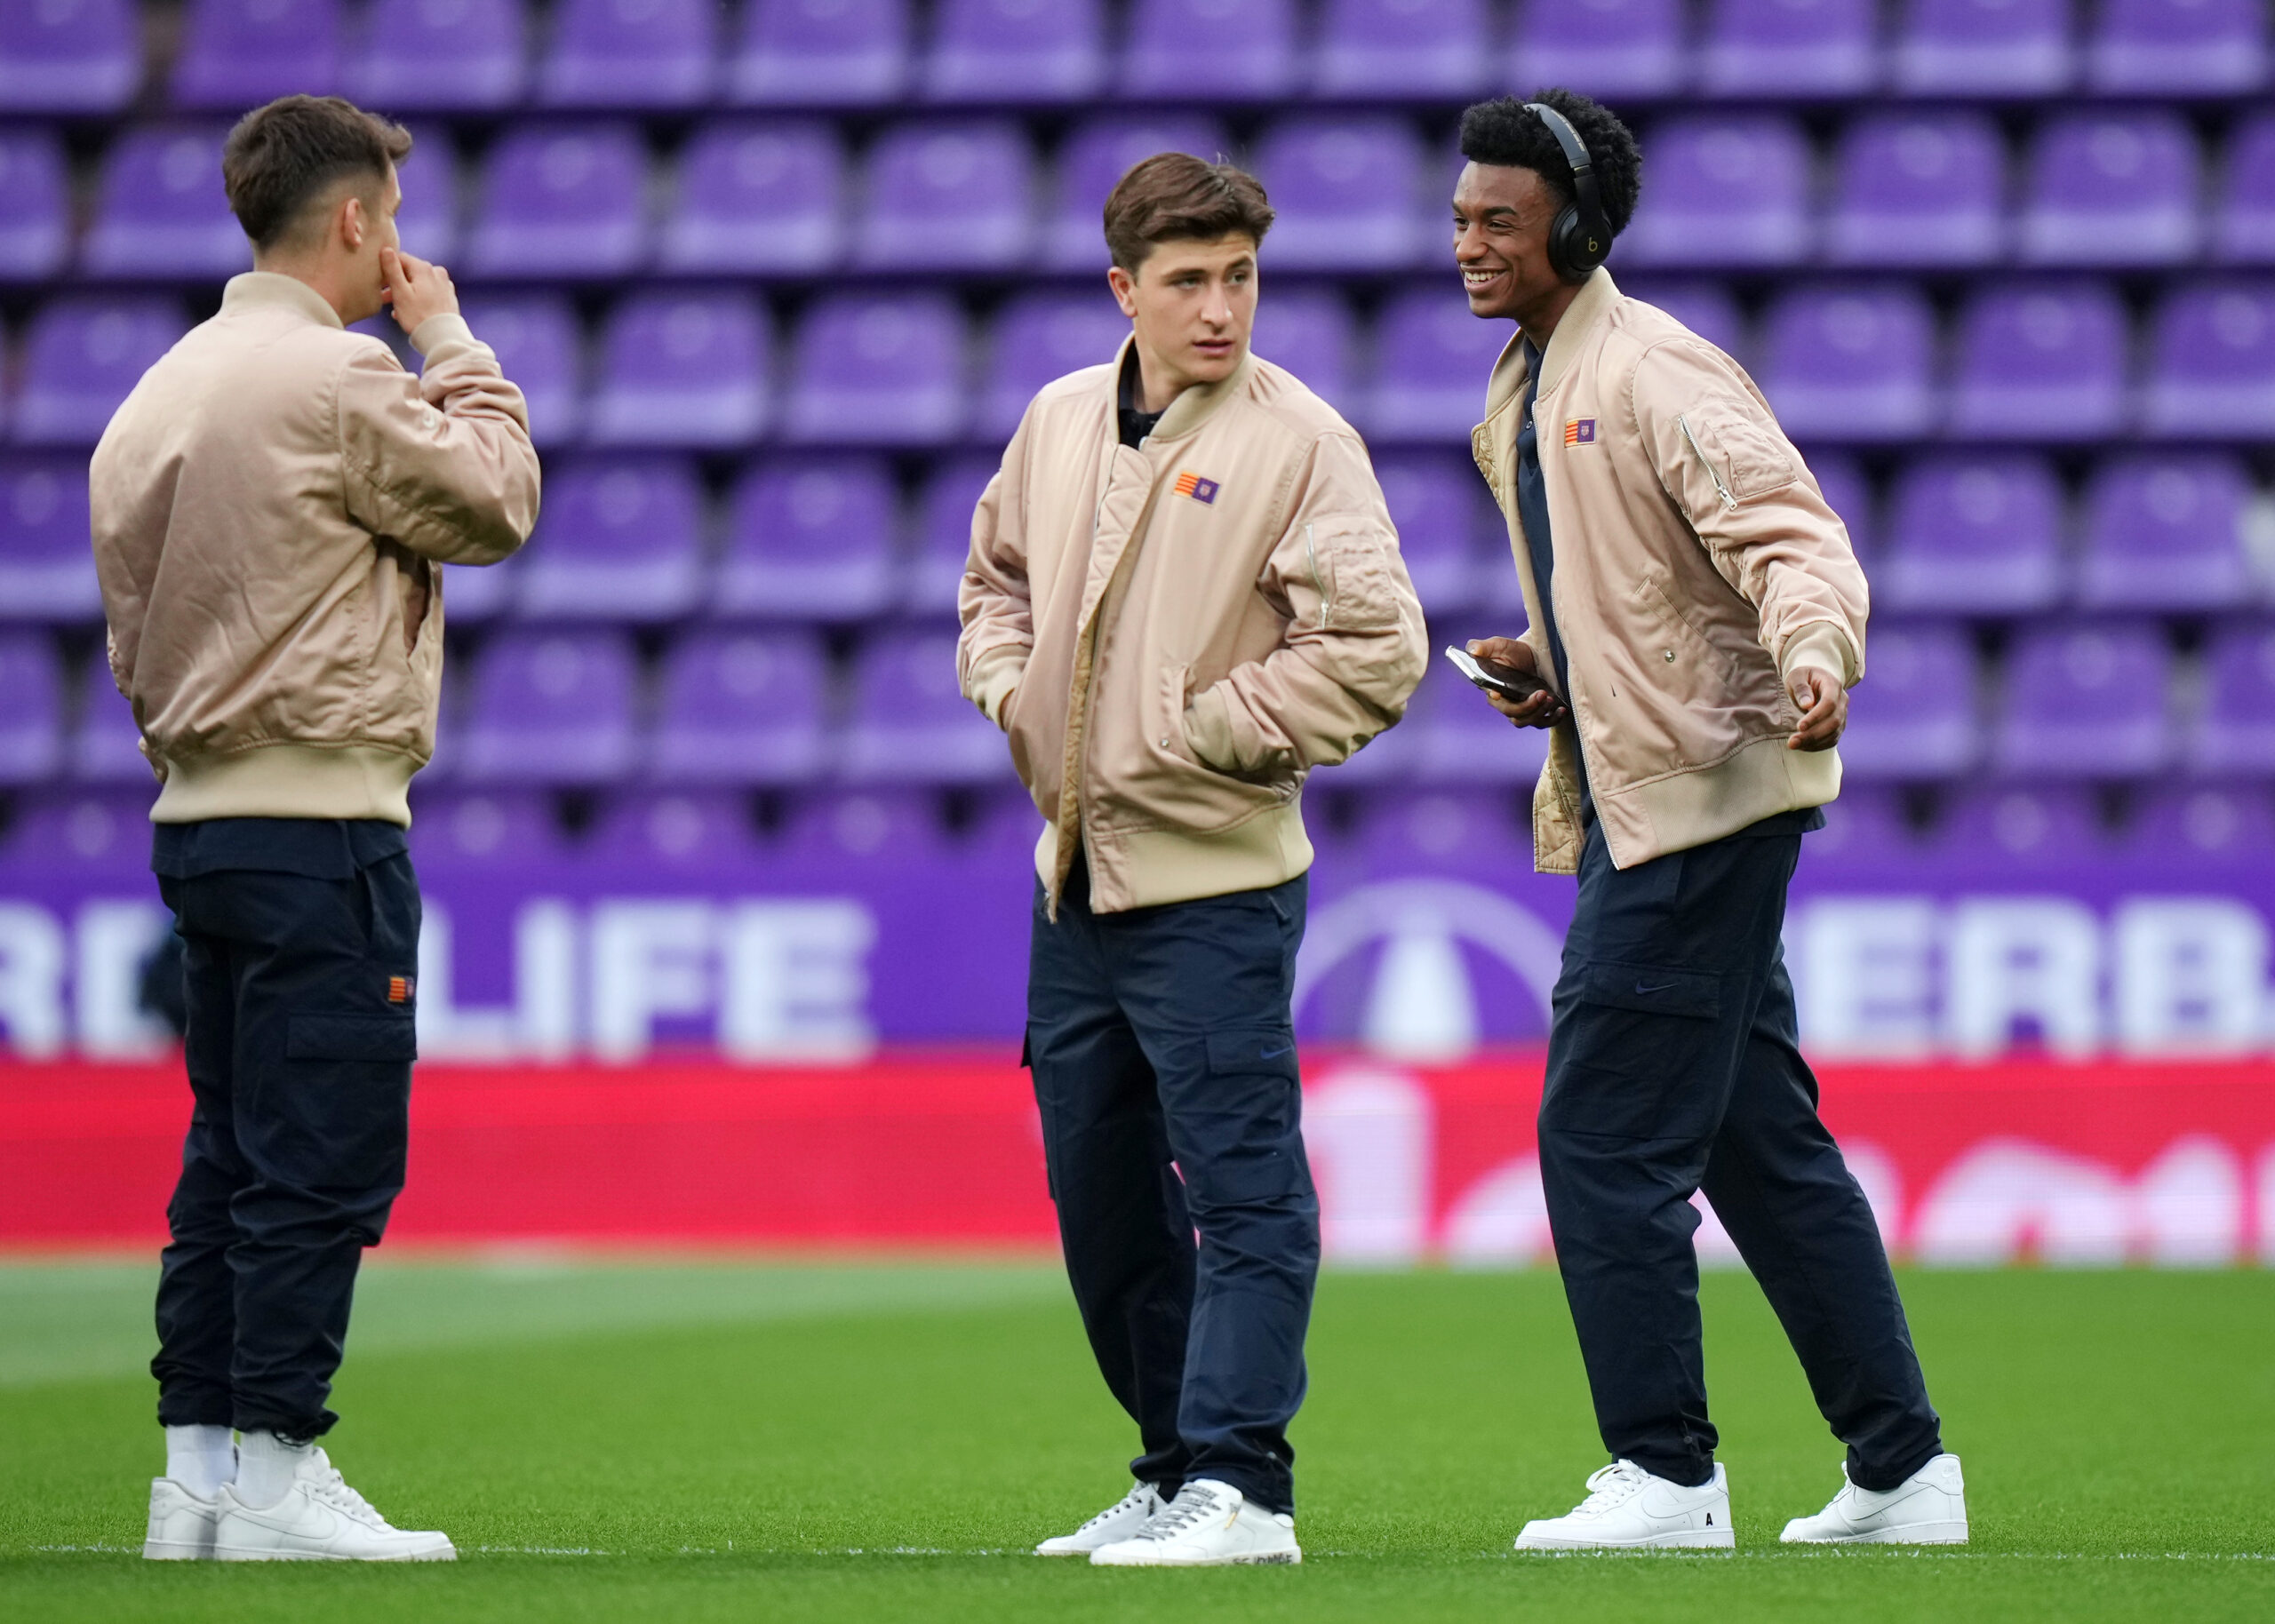 VALLADOLID, SPAIN - MAY 23: Pablo Torre (C) and Alejandro Balde of FC Barcelona (R) inspect the pitch prior to the LaLiga Santander match between Real Valladolid CF and FC Barcelona at Estadio Municipal Jose Zorrilla on May 23, 2023 in Valladolid, Spain.